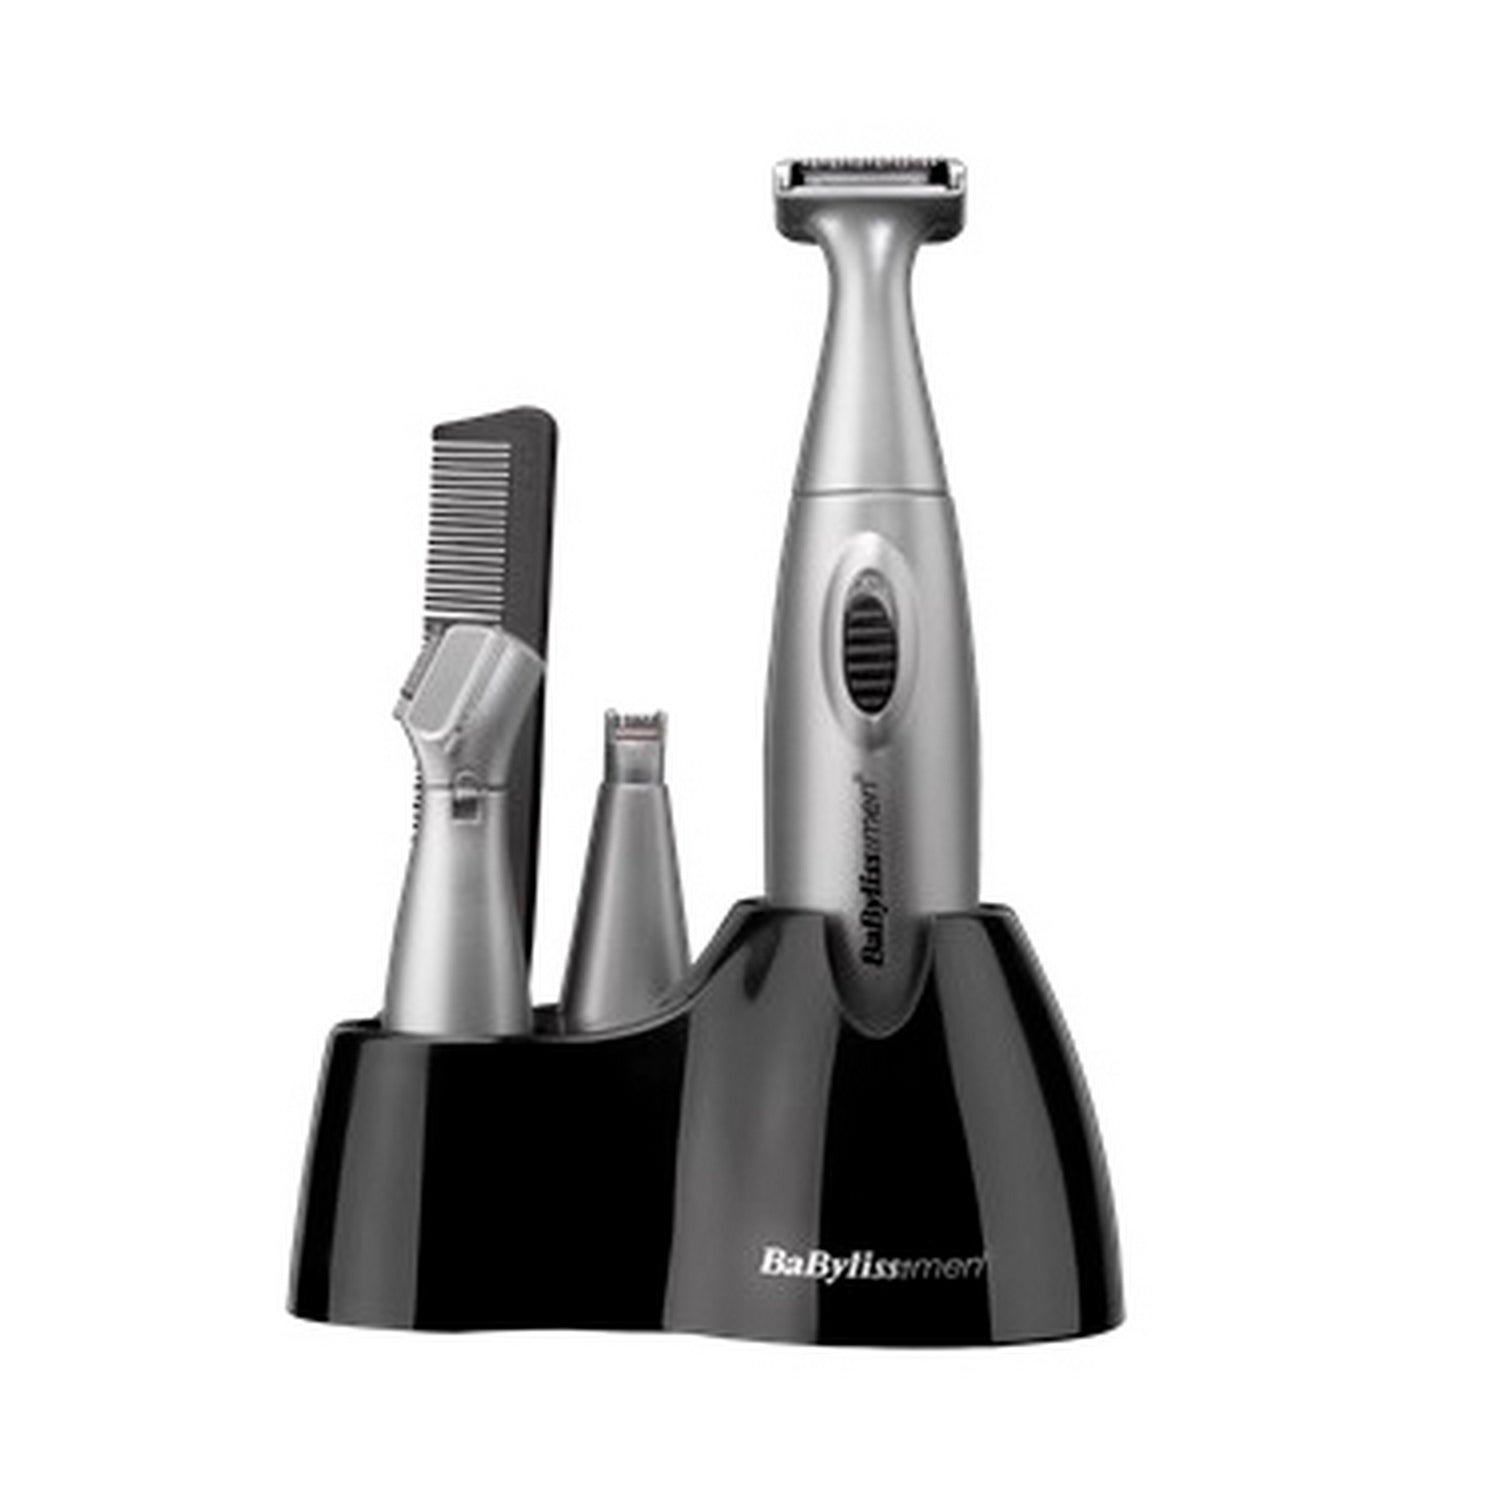 BABYLISS FOR MEN 6 IN 1 PERSONAL GROOMING KIT